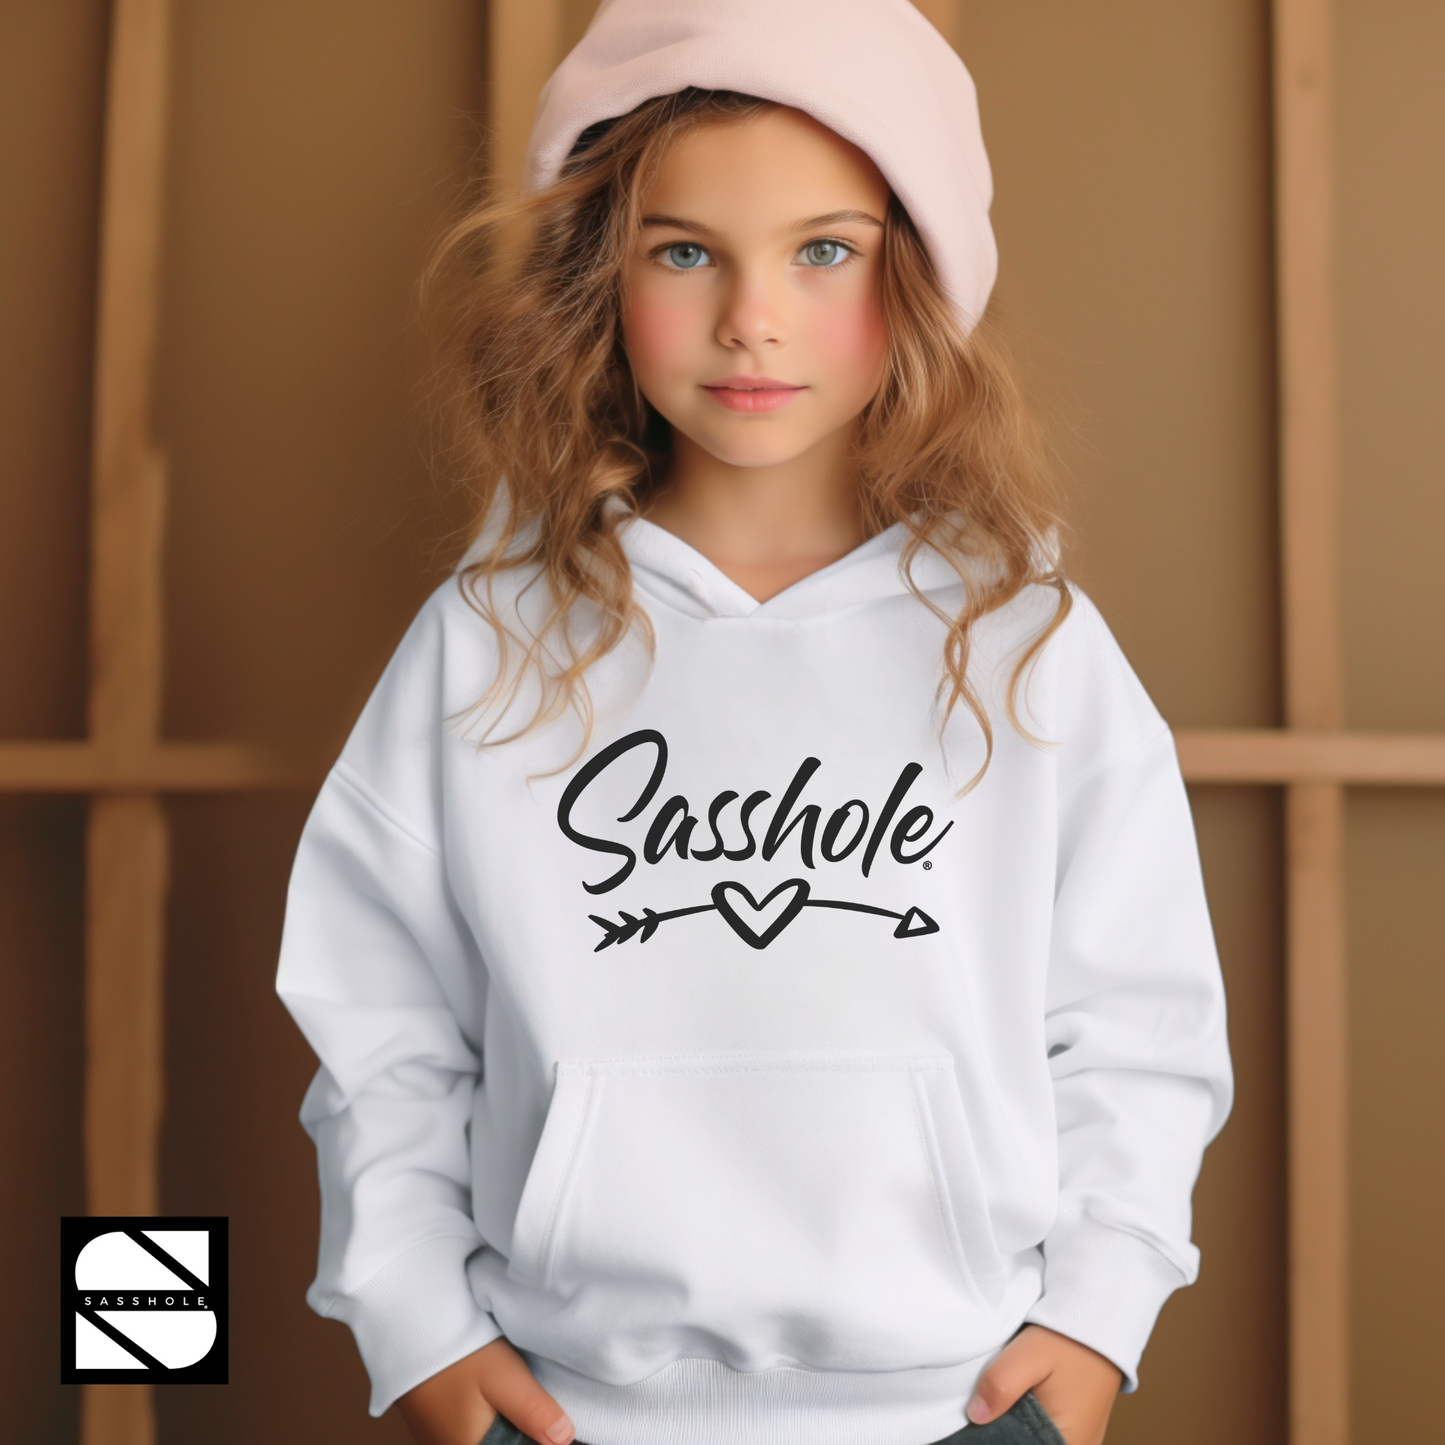 Youthful vibes, Youthful expressions, Youth hoodie, Vibrant styles, Urban chic for kids, Unique hoodie designs, Trendy kids clothing, Trendsetting toddlers, Toddler street style, Sweatshirts, Stylish youngsters, Statement apparel for kids, Sassy kids wear, Sasshole Youth Collection, Sass meets comfort, Regular fit, Quirky kidswear, Quality kidswear, Playful designs, Personality-packed hoodies